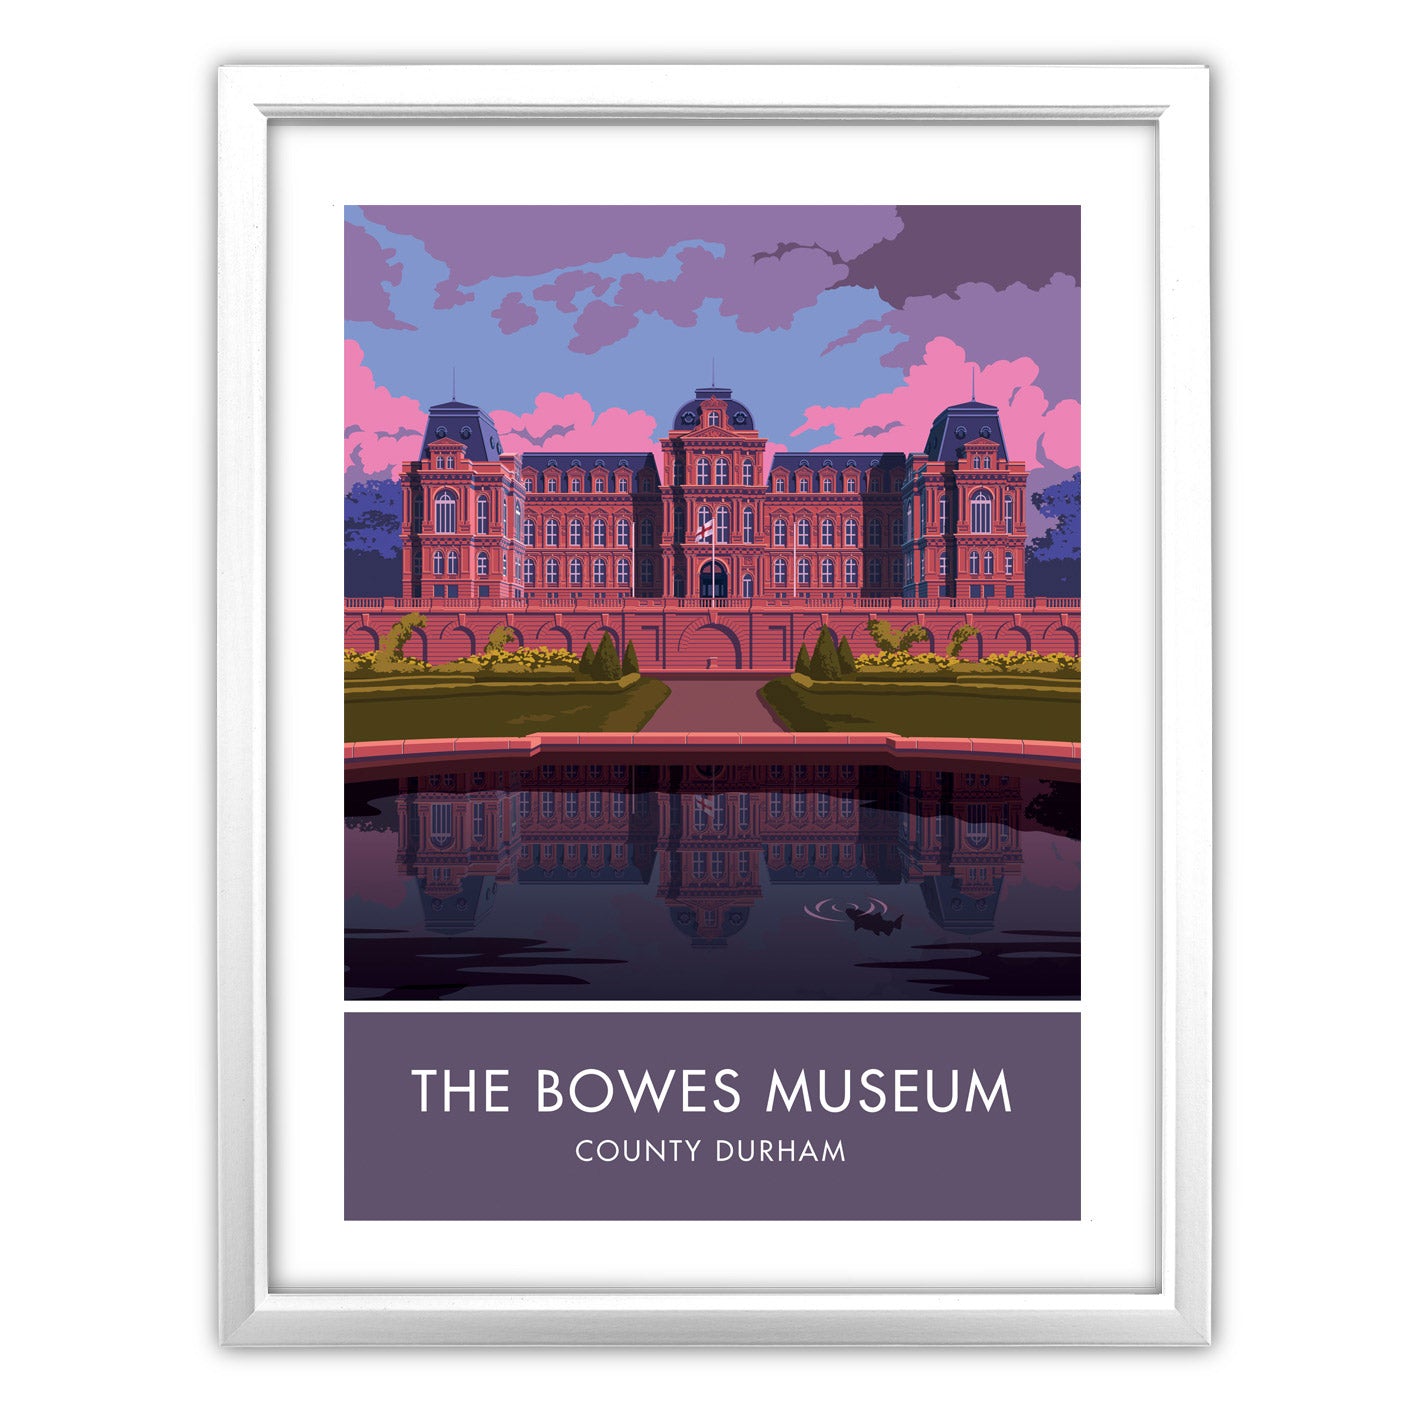 The Bowes Museum Art Print